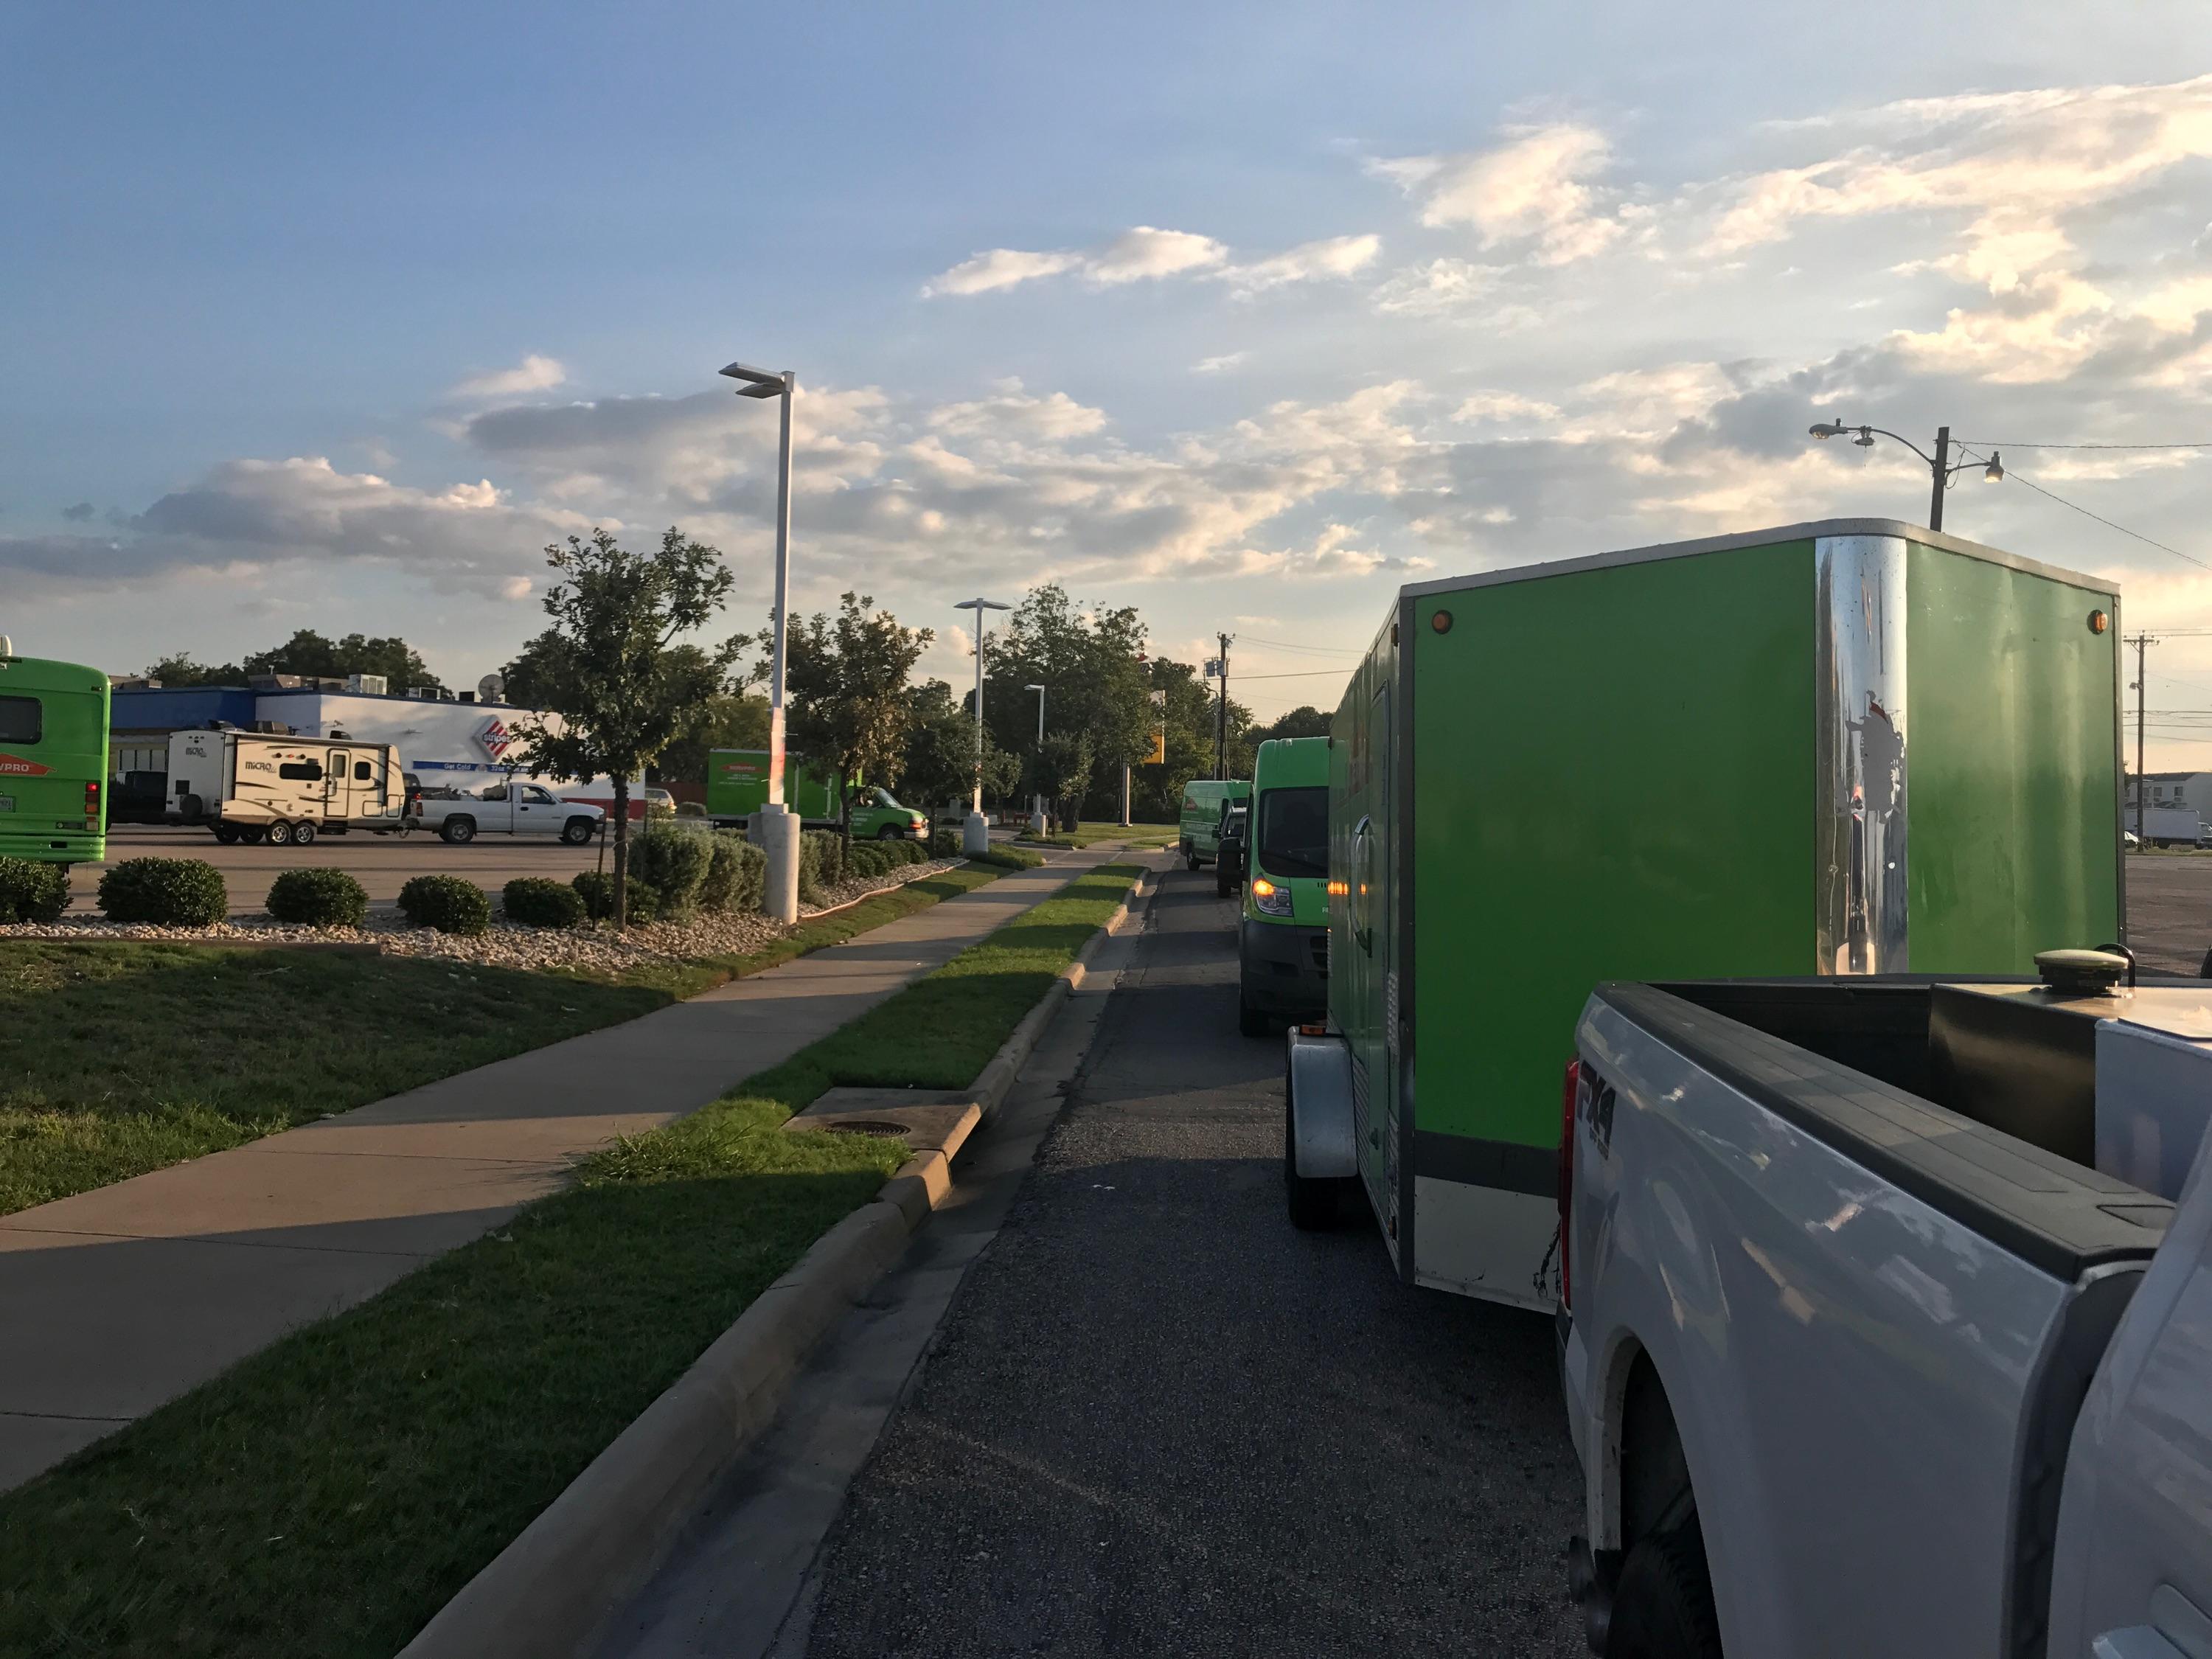 SERVPRO of The Seacoast was contracted by Advanced Auto Parts to complete the restoration to their stored in the areas affected by Hurricane Harvey.